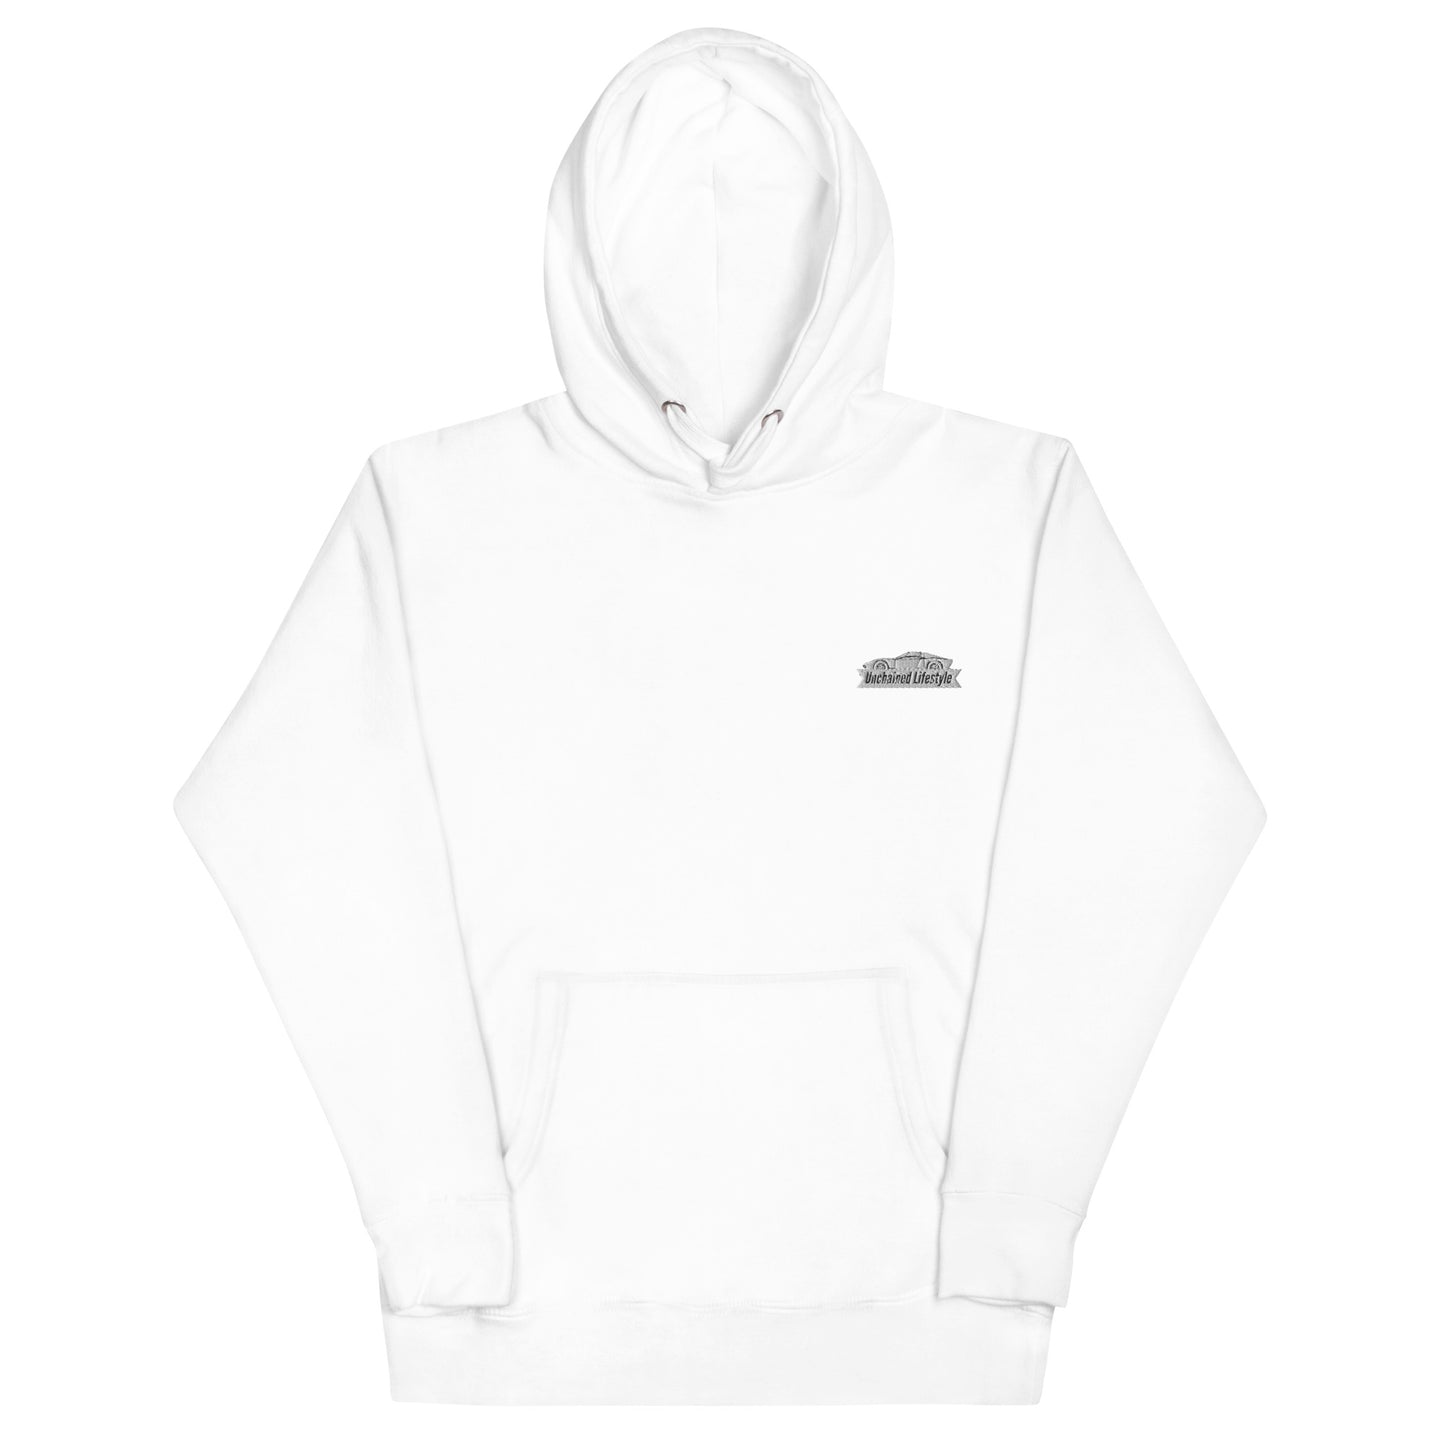 Unchained Lifestyle car hoodie